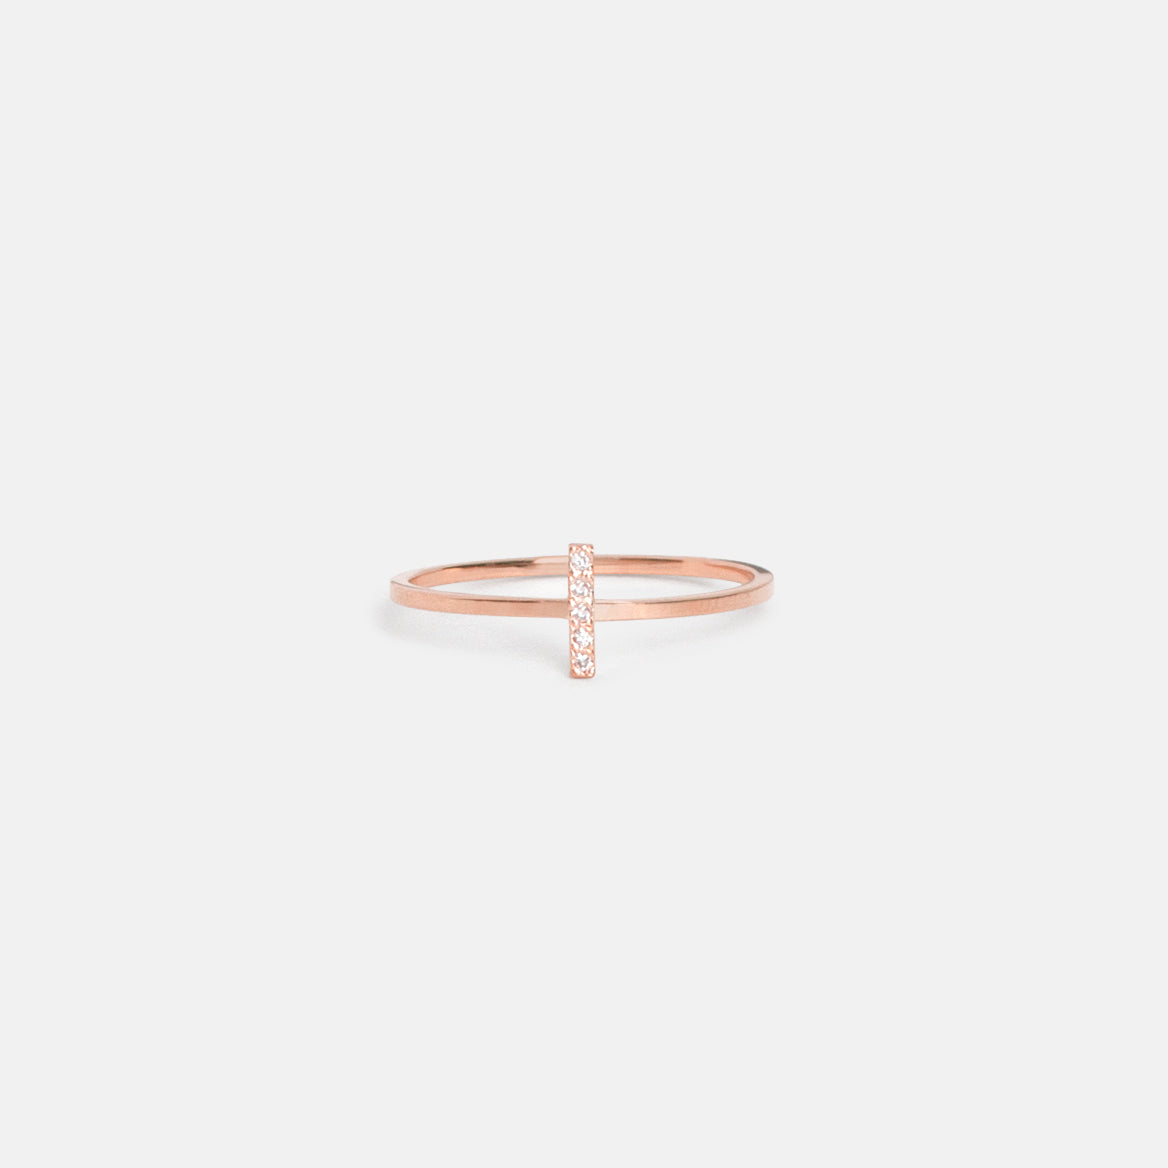 Stevi Cool Ring in 14k Rose Gold set with White Diamonds by SHW Fine Jewelry